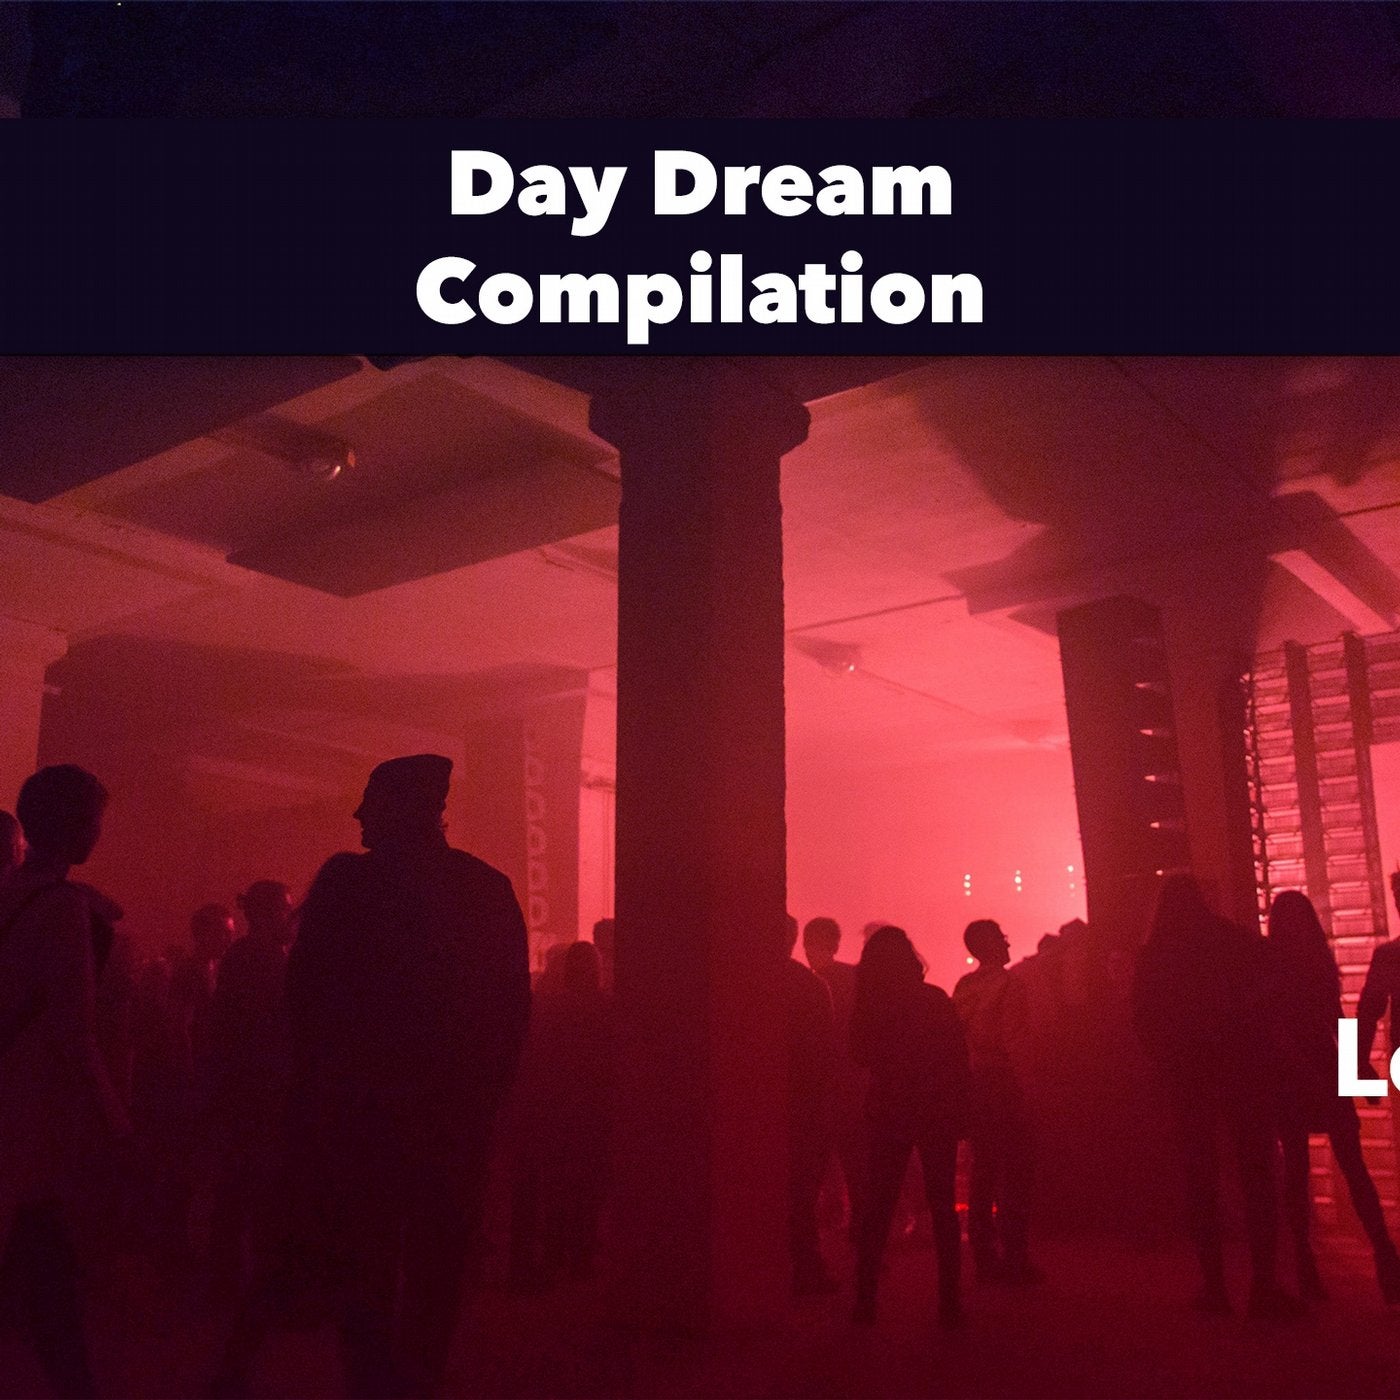 Day Dream Compilation